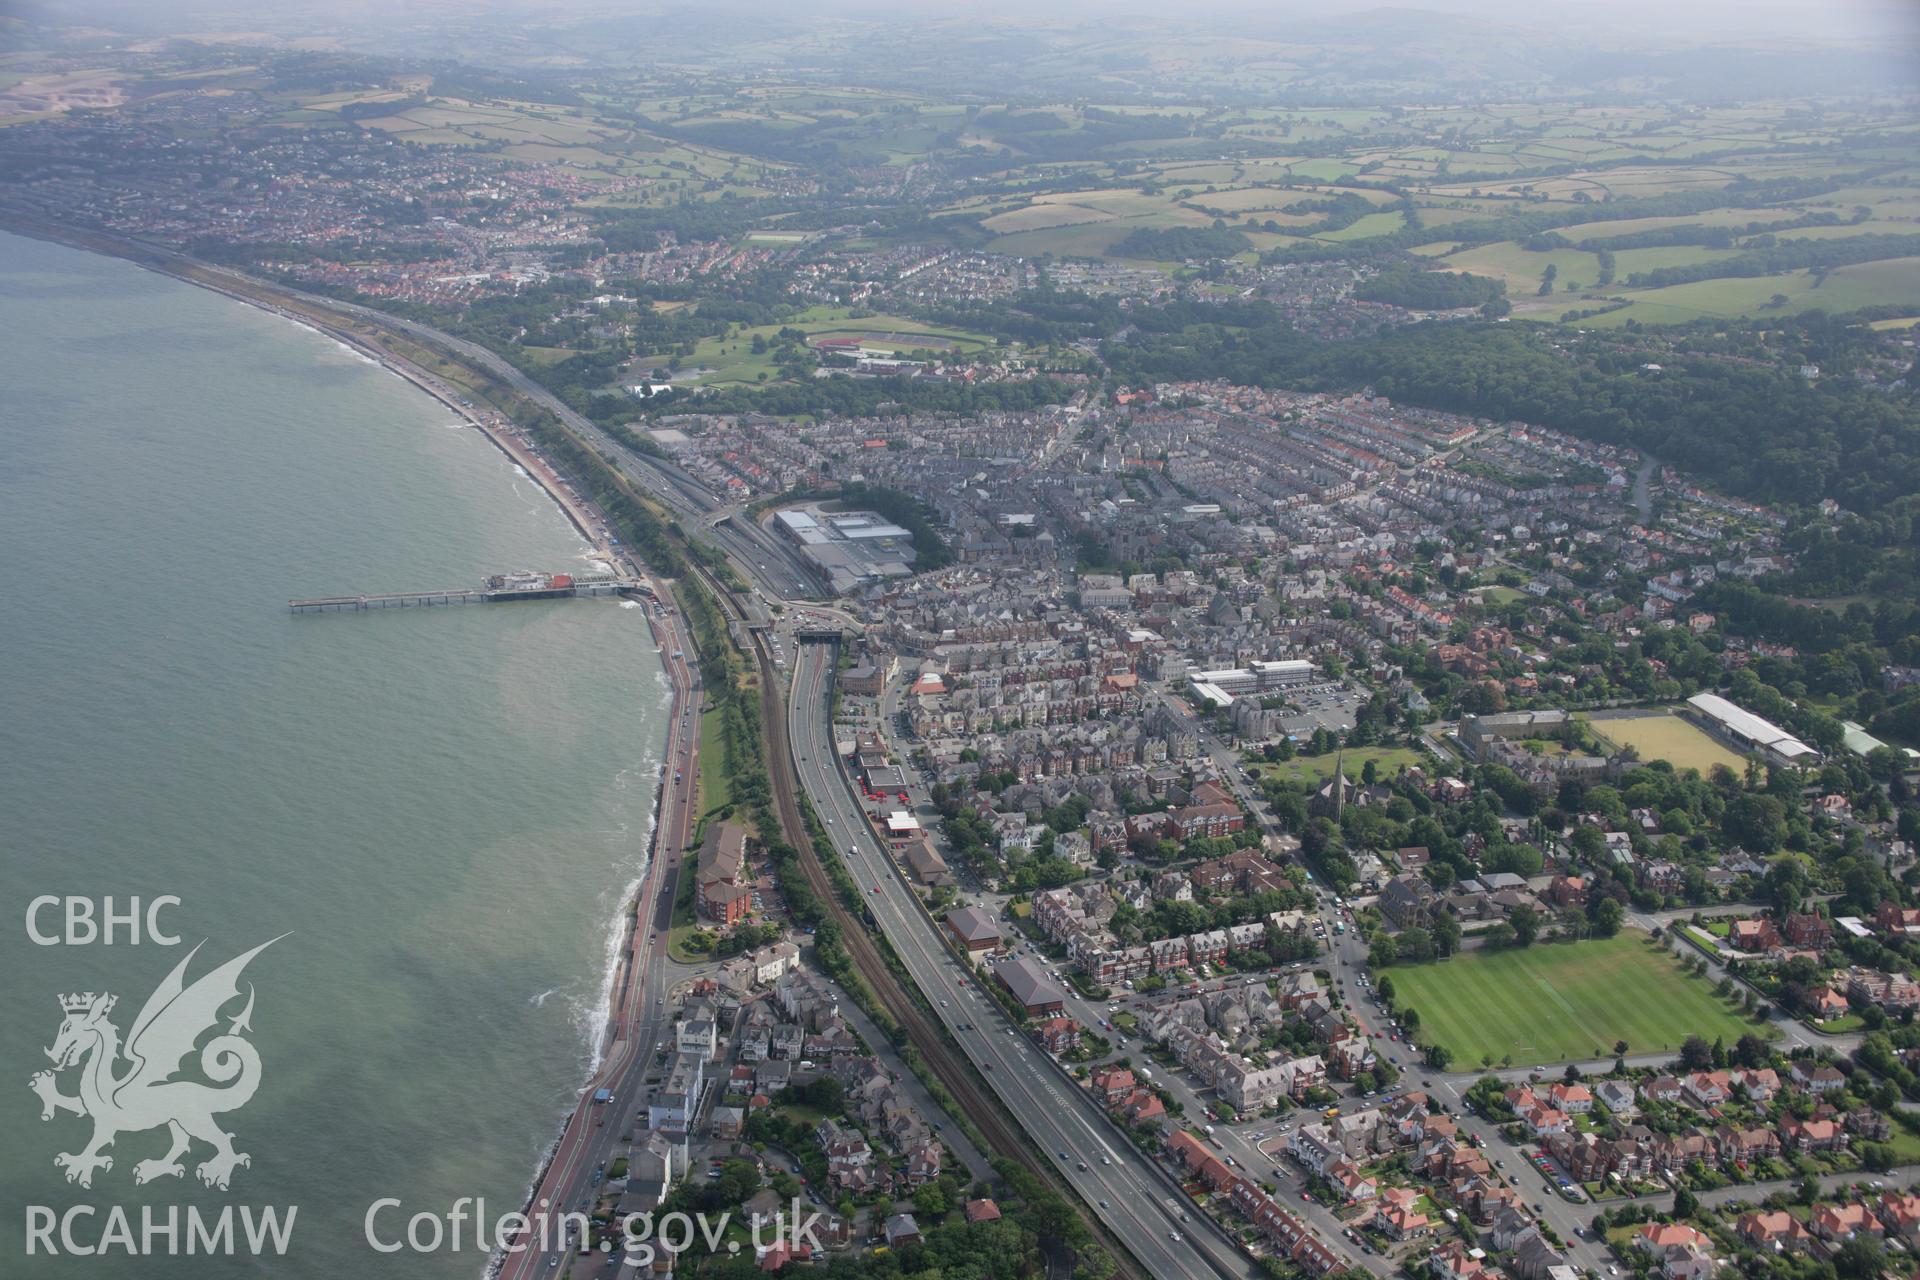 RCAHMW colour oblique aerial photograph of Colwyn Bay. Taken on 14 August 2006 by Toby Driver.